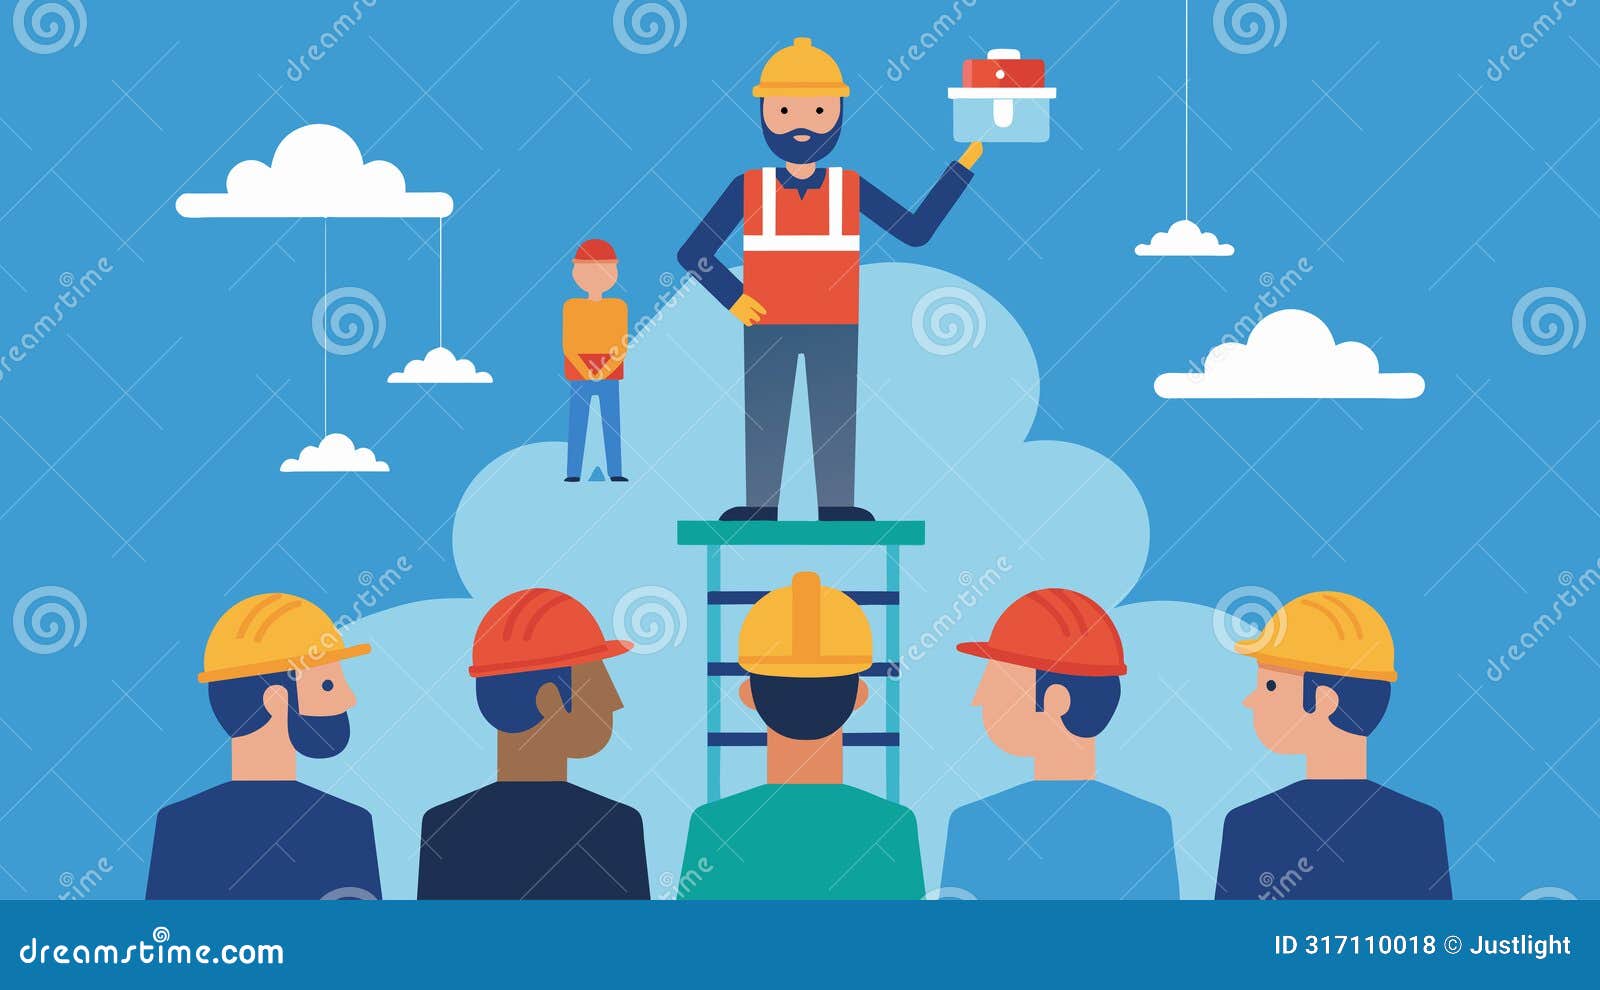 from the platform the foreman can easily assess the progress of multiple construction teams and redirect resources as